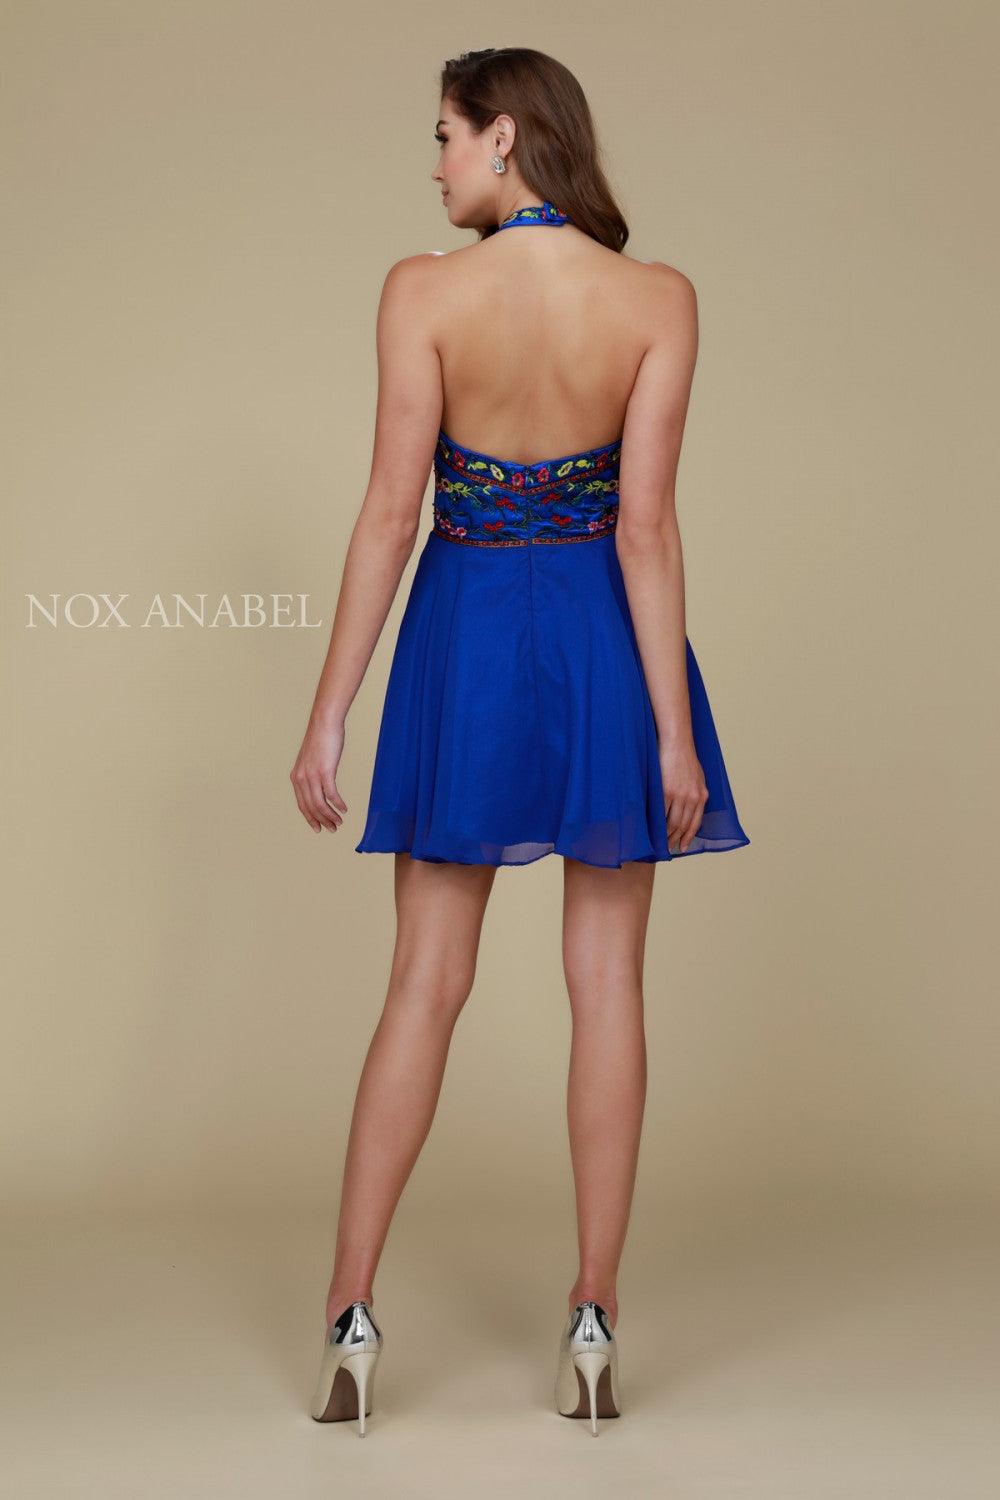 Short Sexy Formal Prom Cocktail Dress - The Dress Outlet Nox Anabel